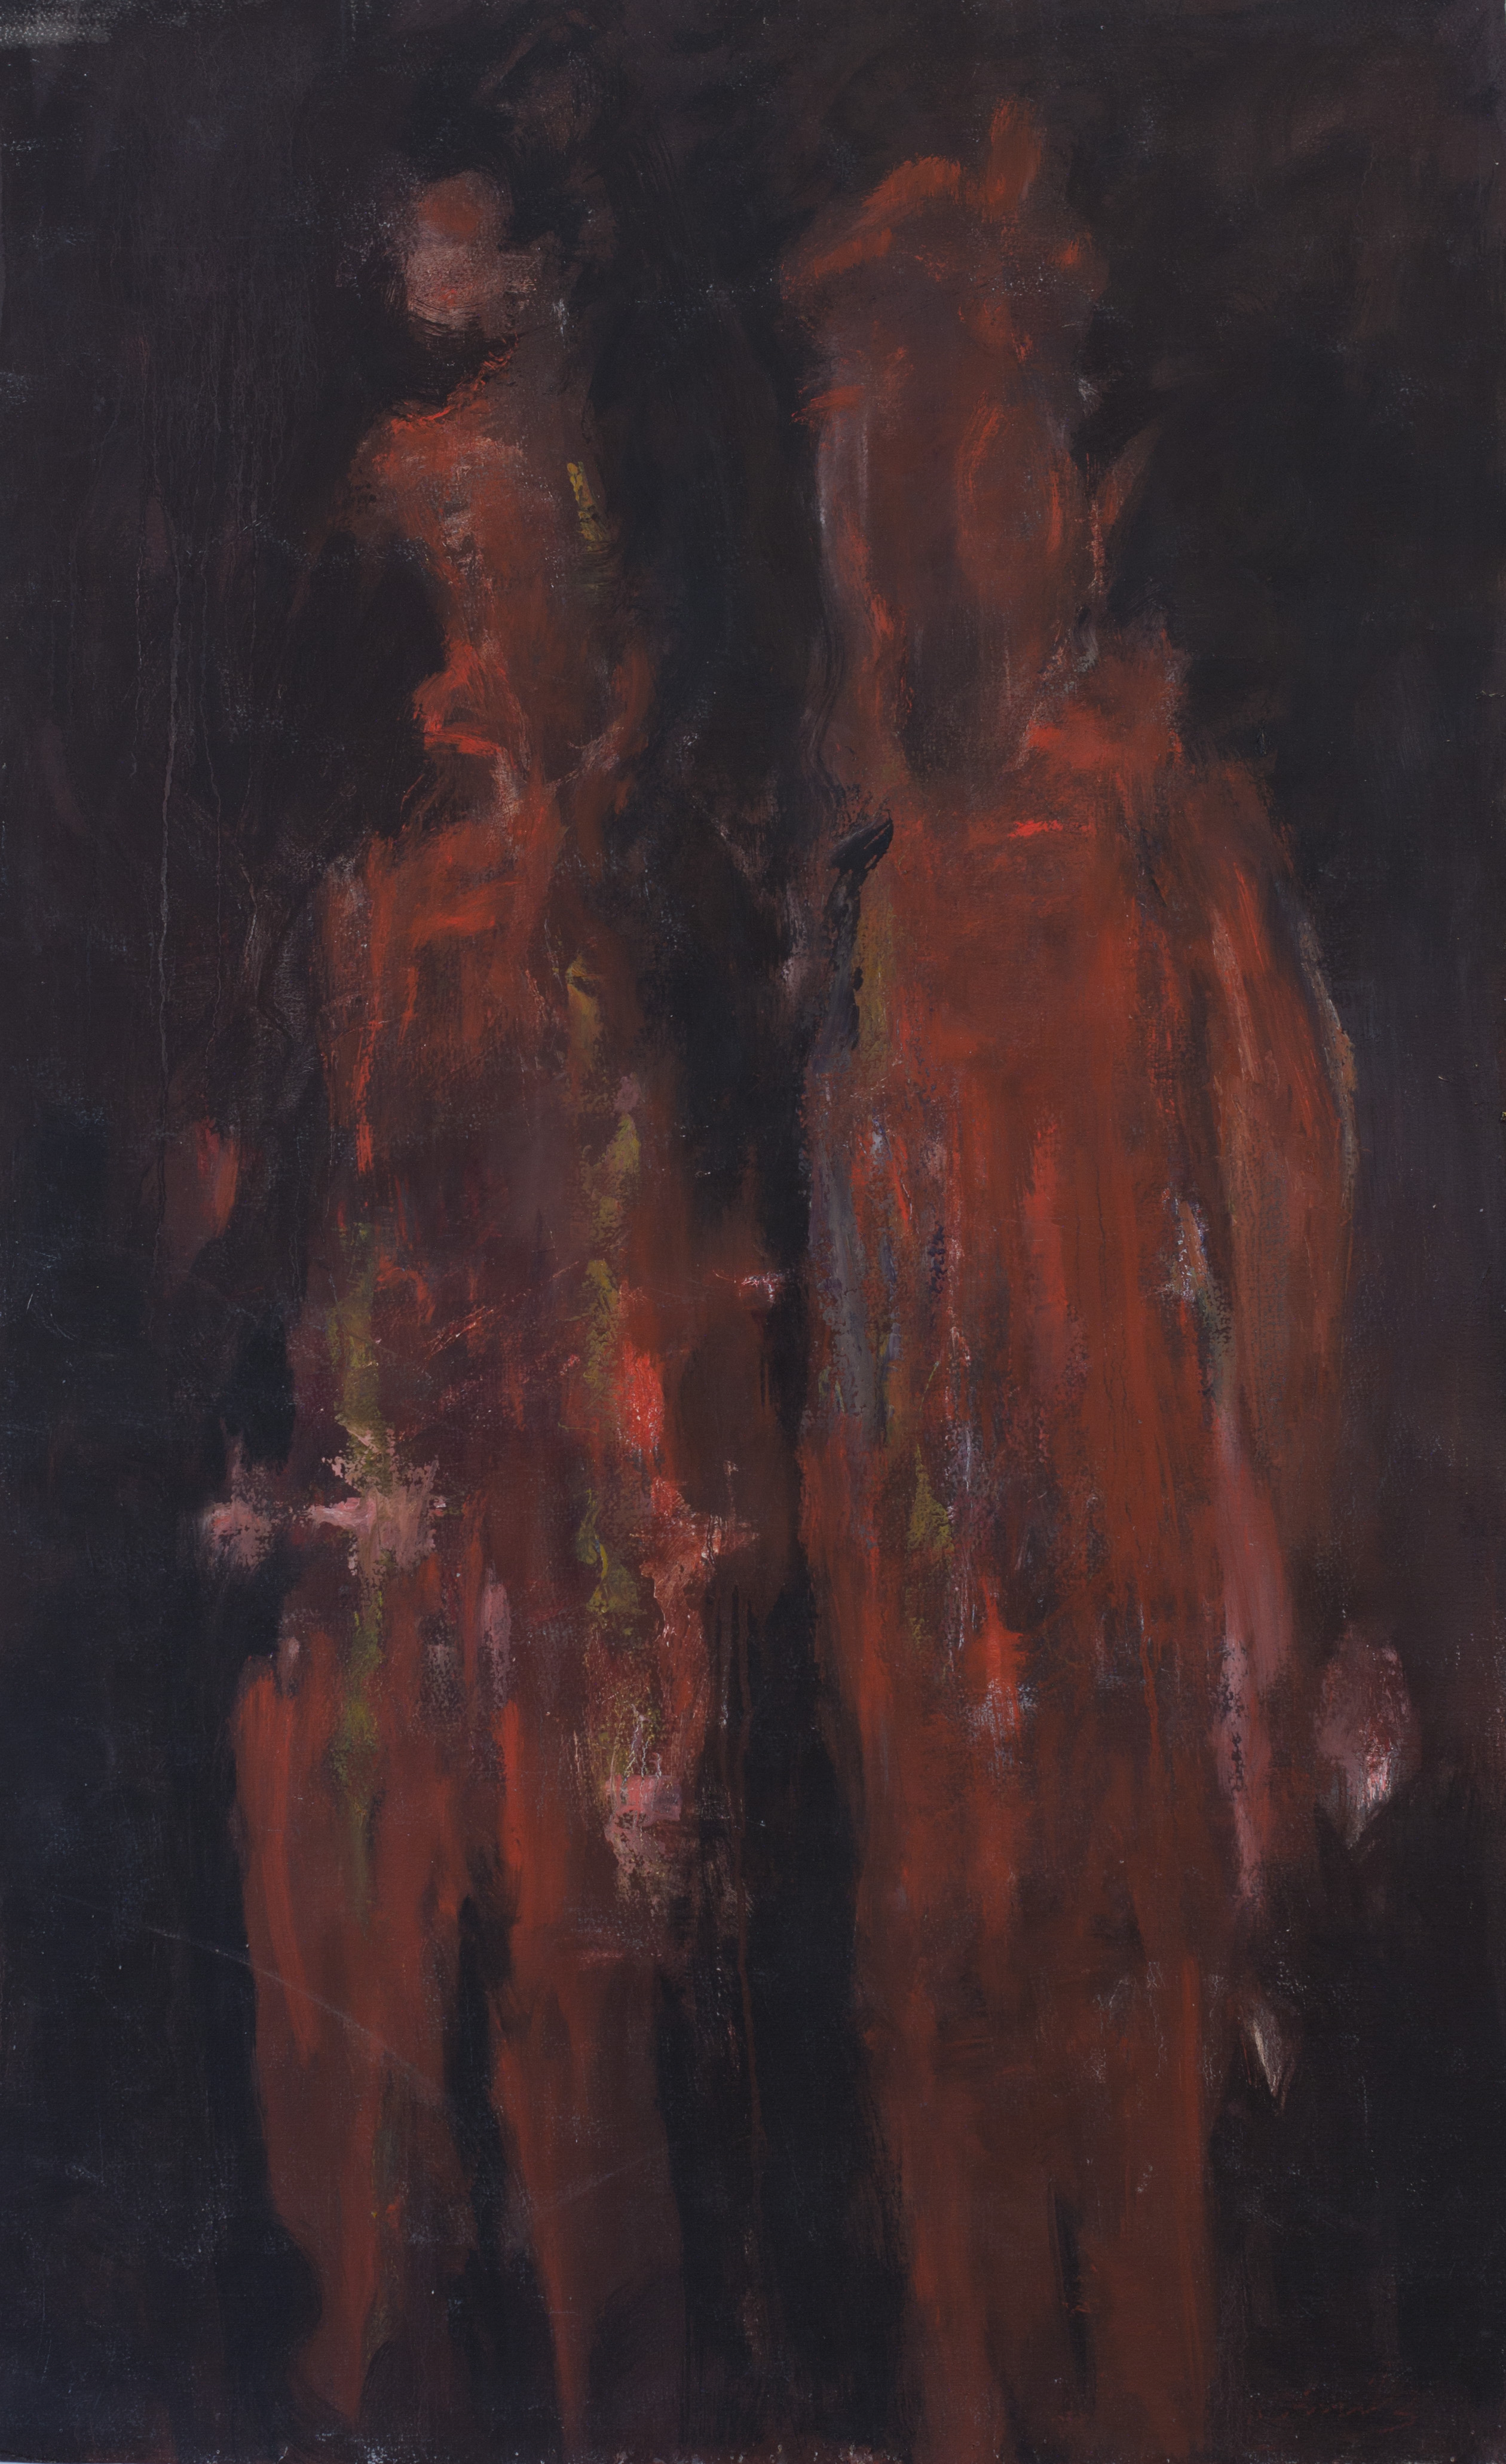 Painting: Two Figures (#63) by Eleanor Hilowitz (1913 - 2007)